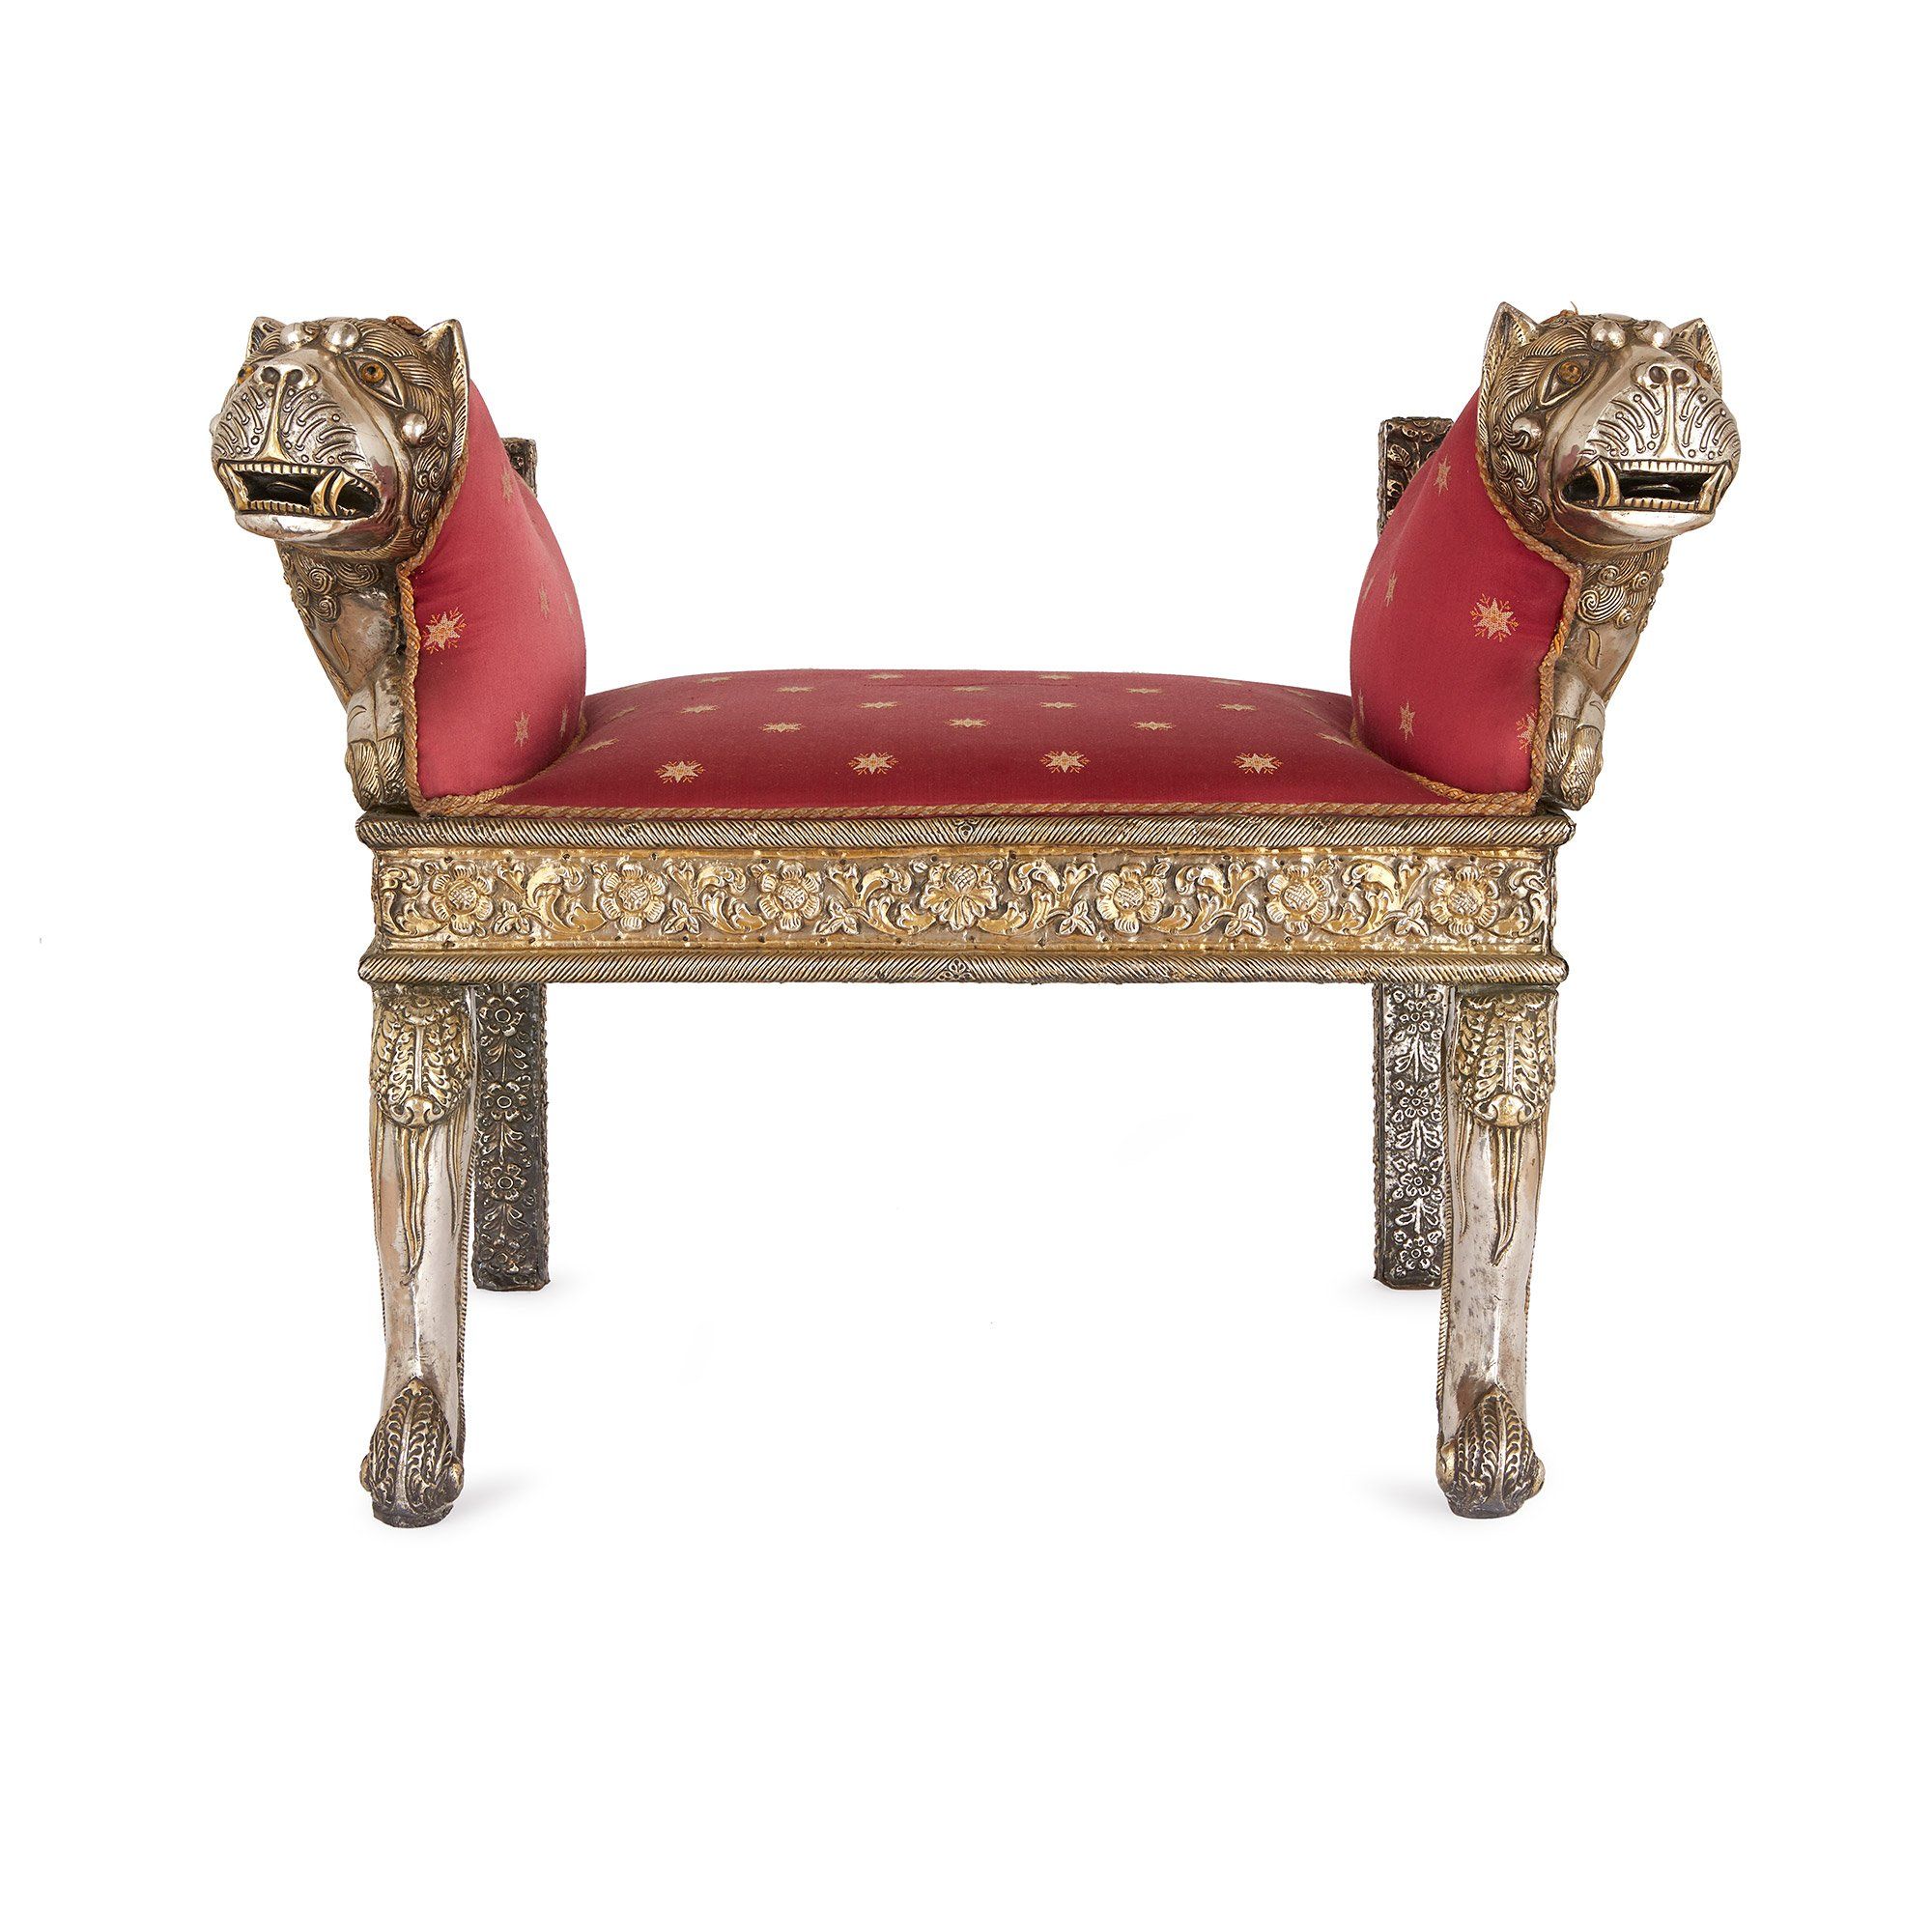 Antique Indian Silver Bench With Tiger Form Armrests Mayfair Gallery